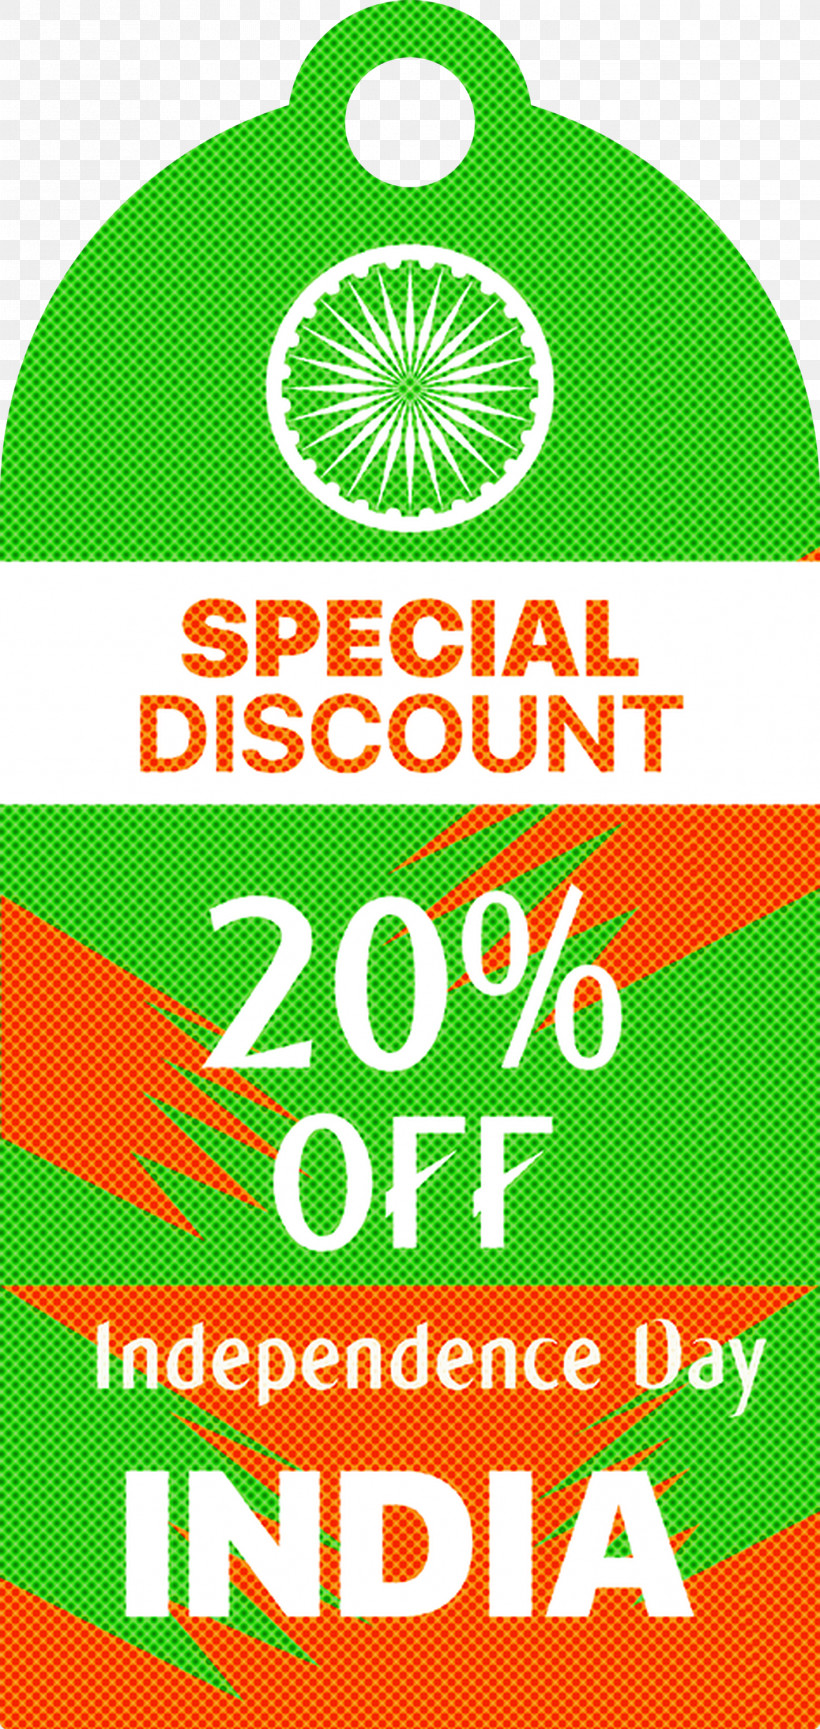 India Indenpendence Day Sale Tag India Indenpendence Day Sale Label, PNG, 1422x3000px, India Indenpendence Day Sale Tag, Area, India, India Indenpendence Day Sale Label, Label Download Free